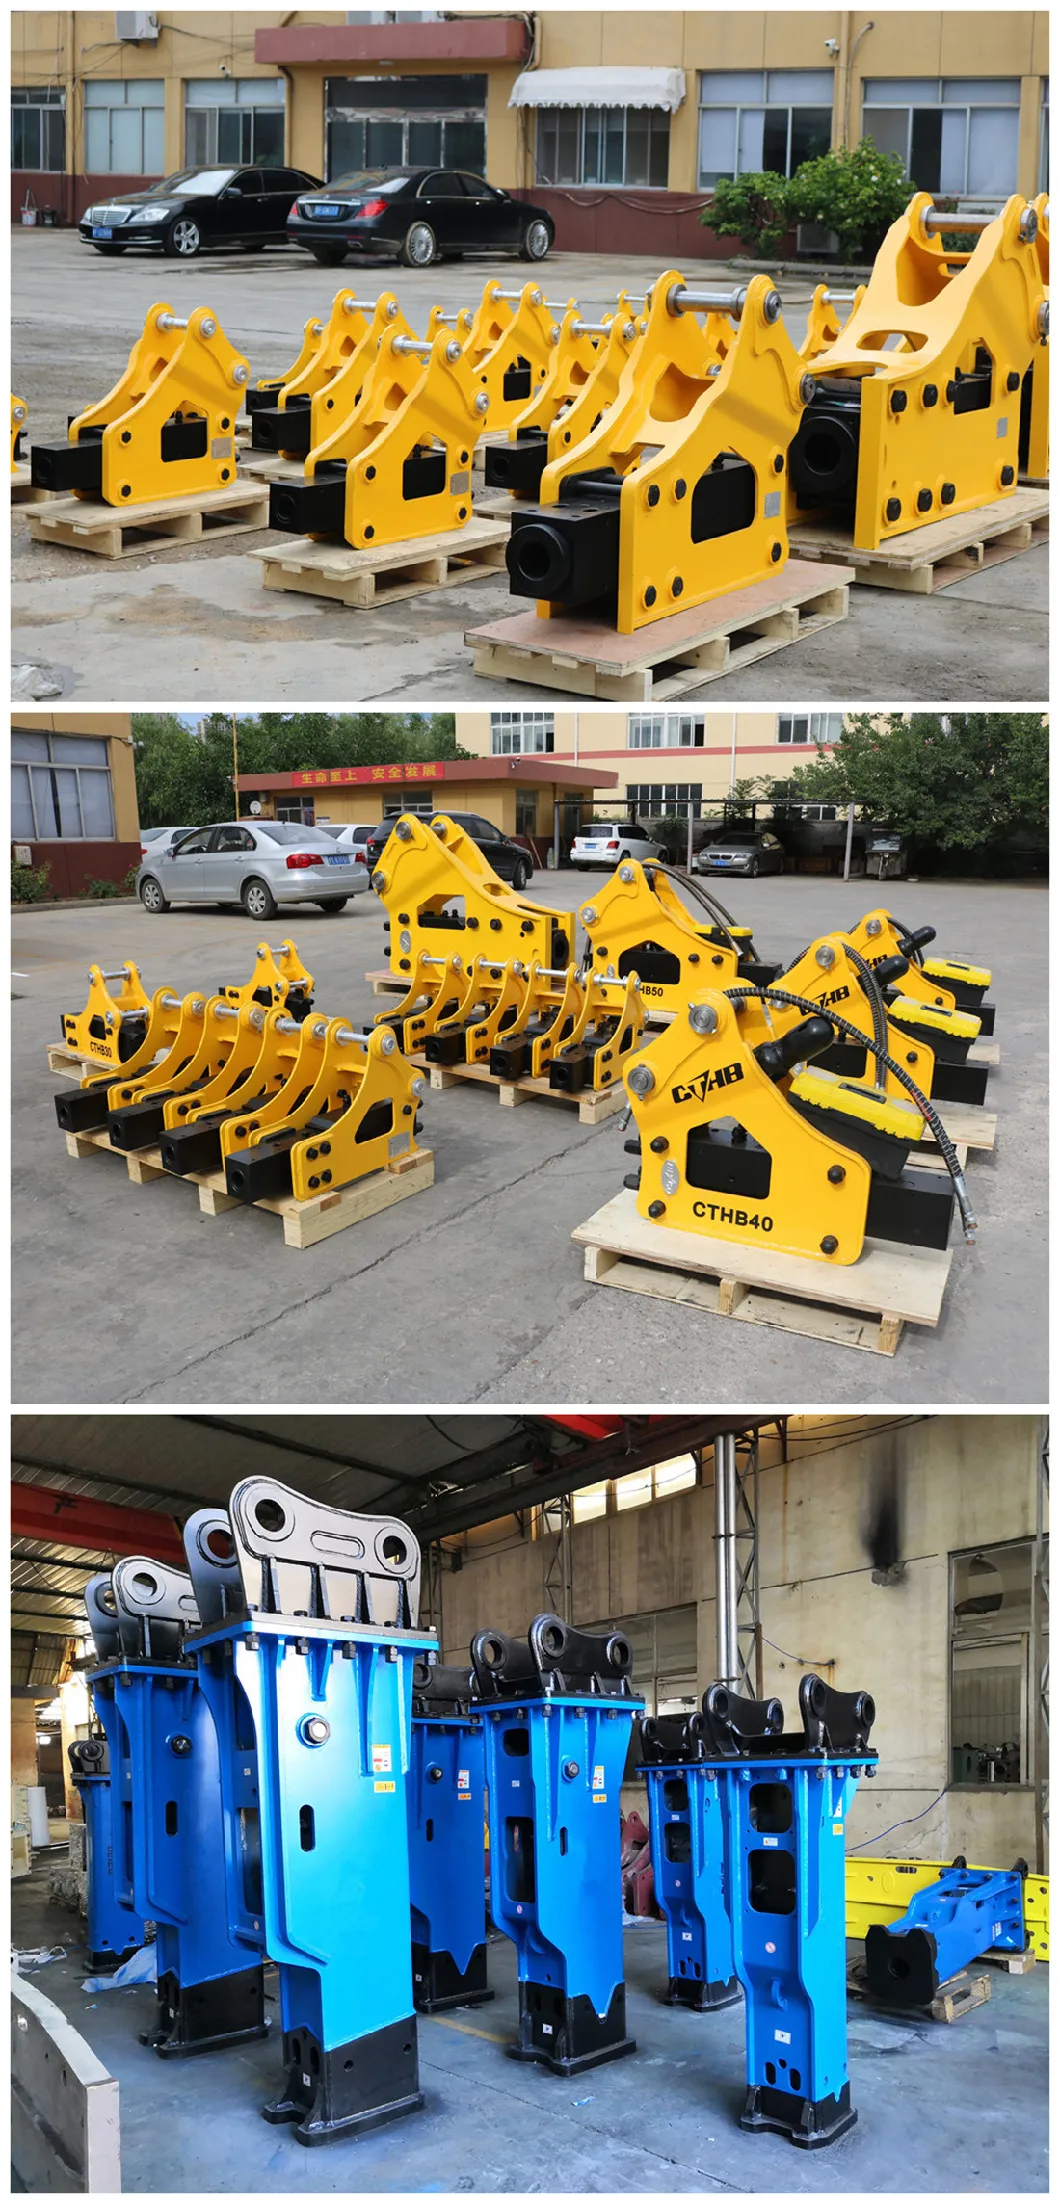 Cthb Giant Hydraulic Breaker for Sale